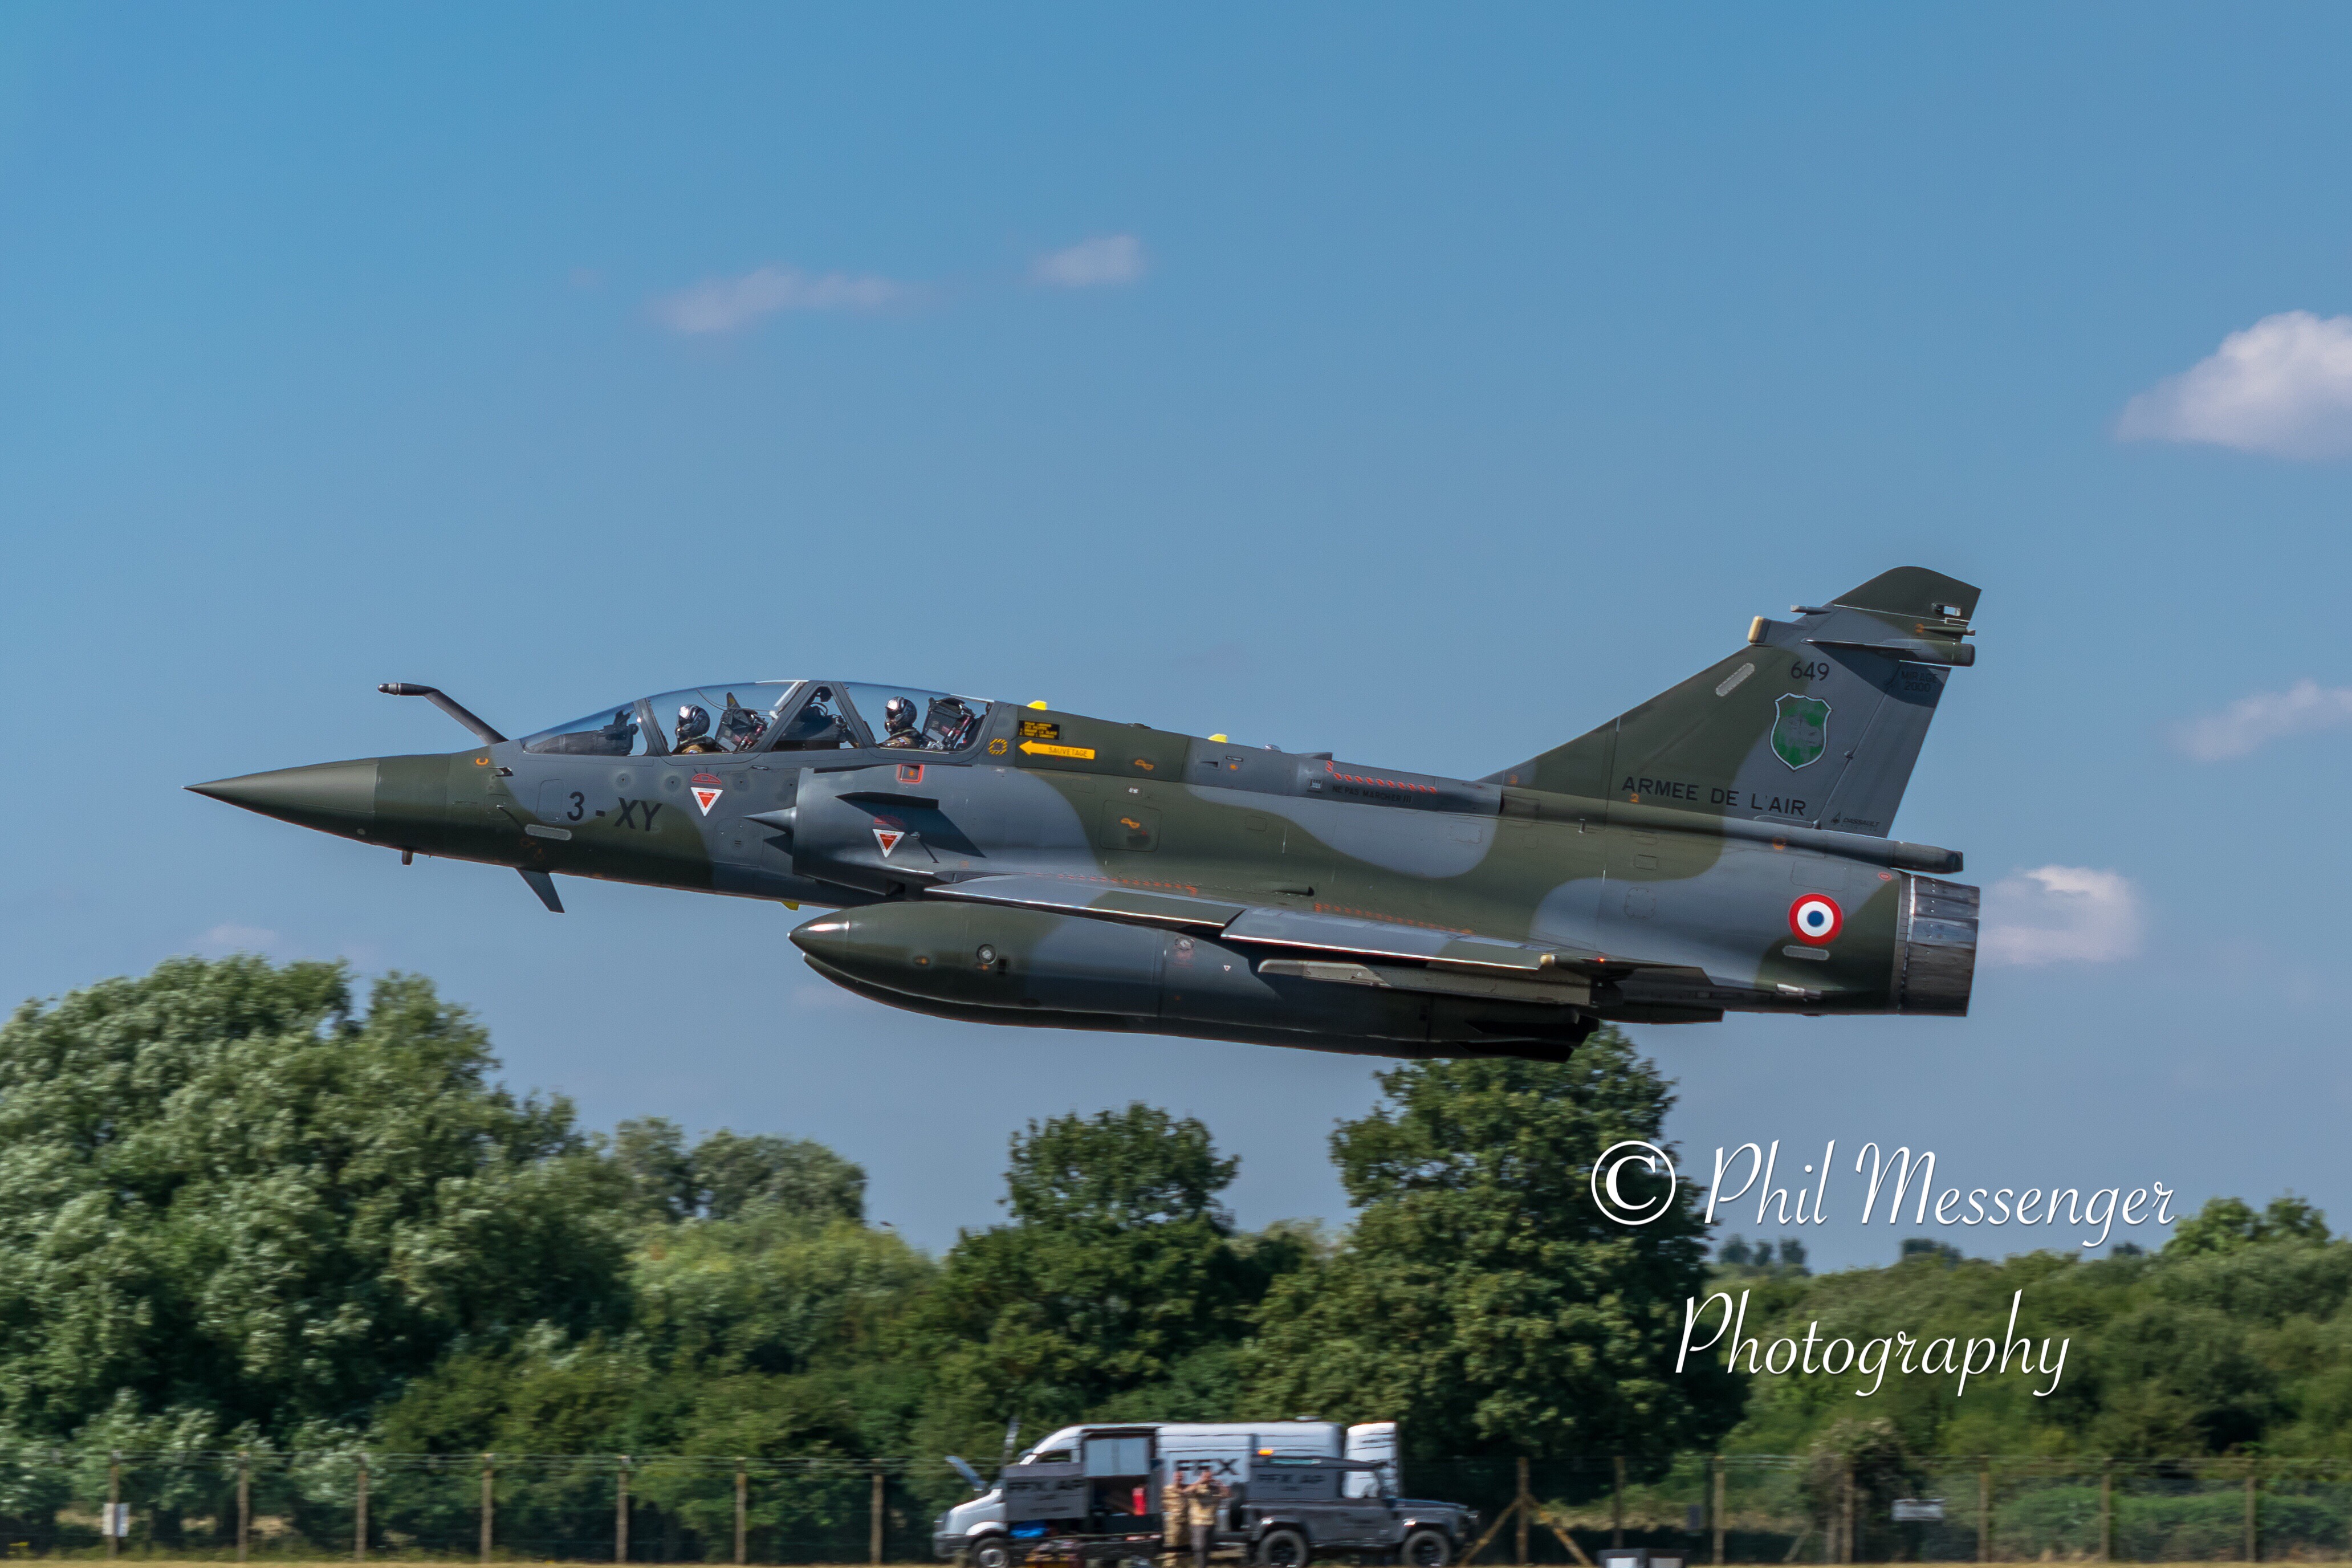 French Dassault Mirage 2000D taken at the Royal International Air Tattoo, Fairford, Gloucestershire  2018